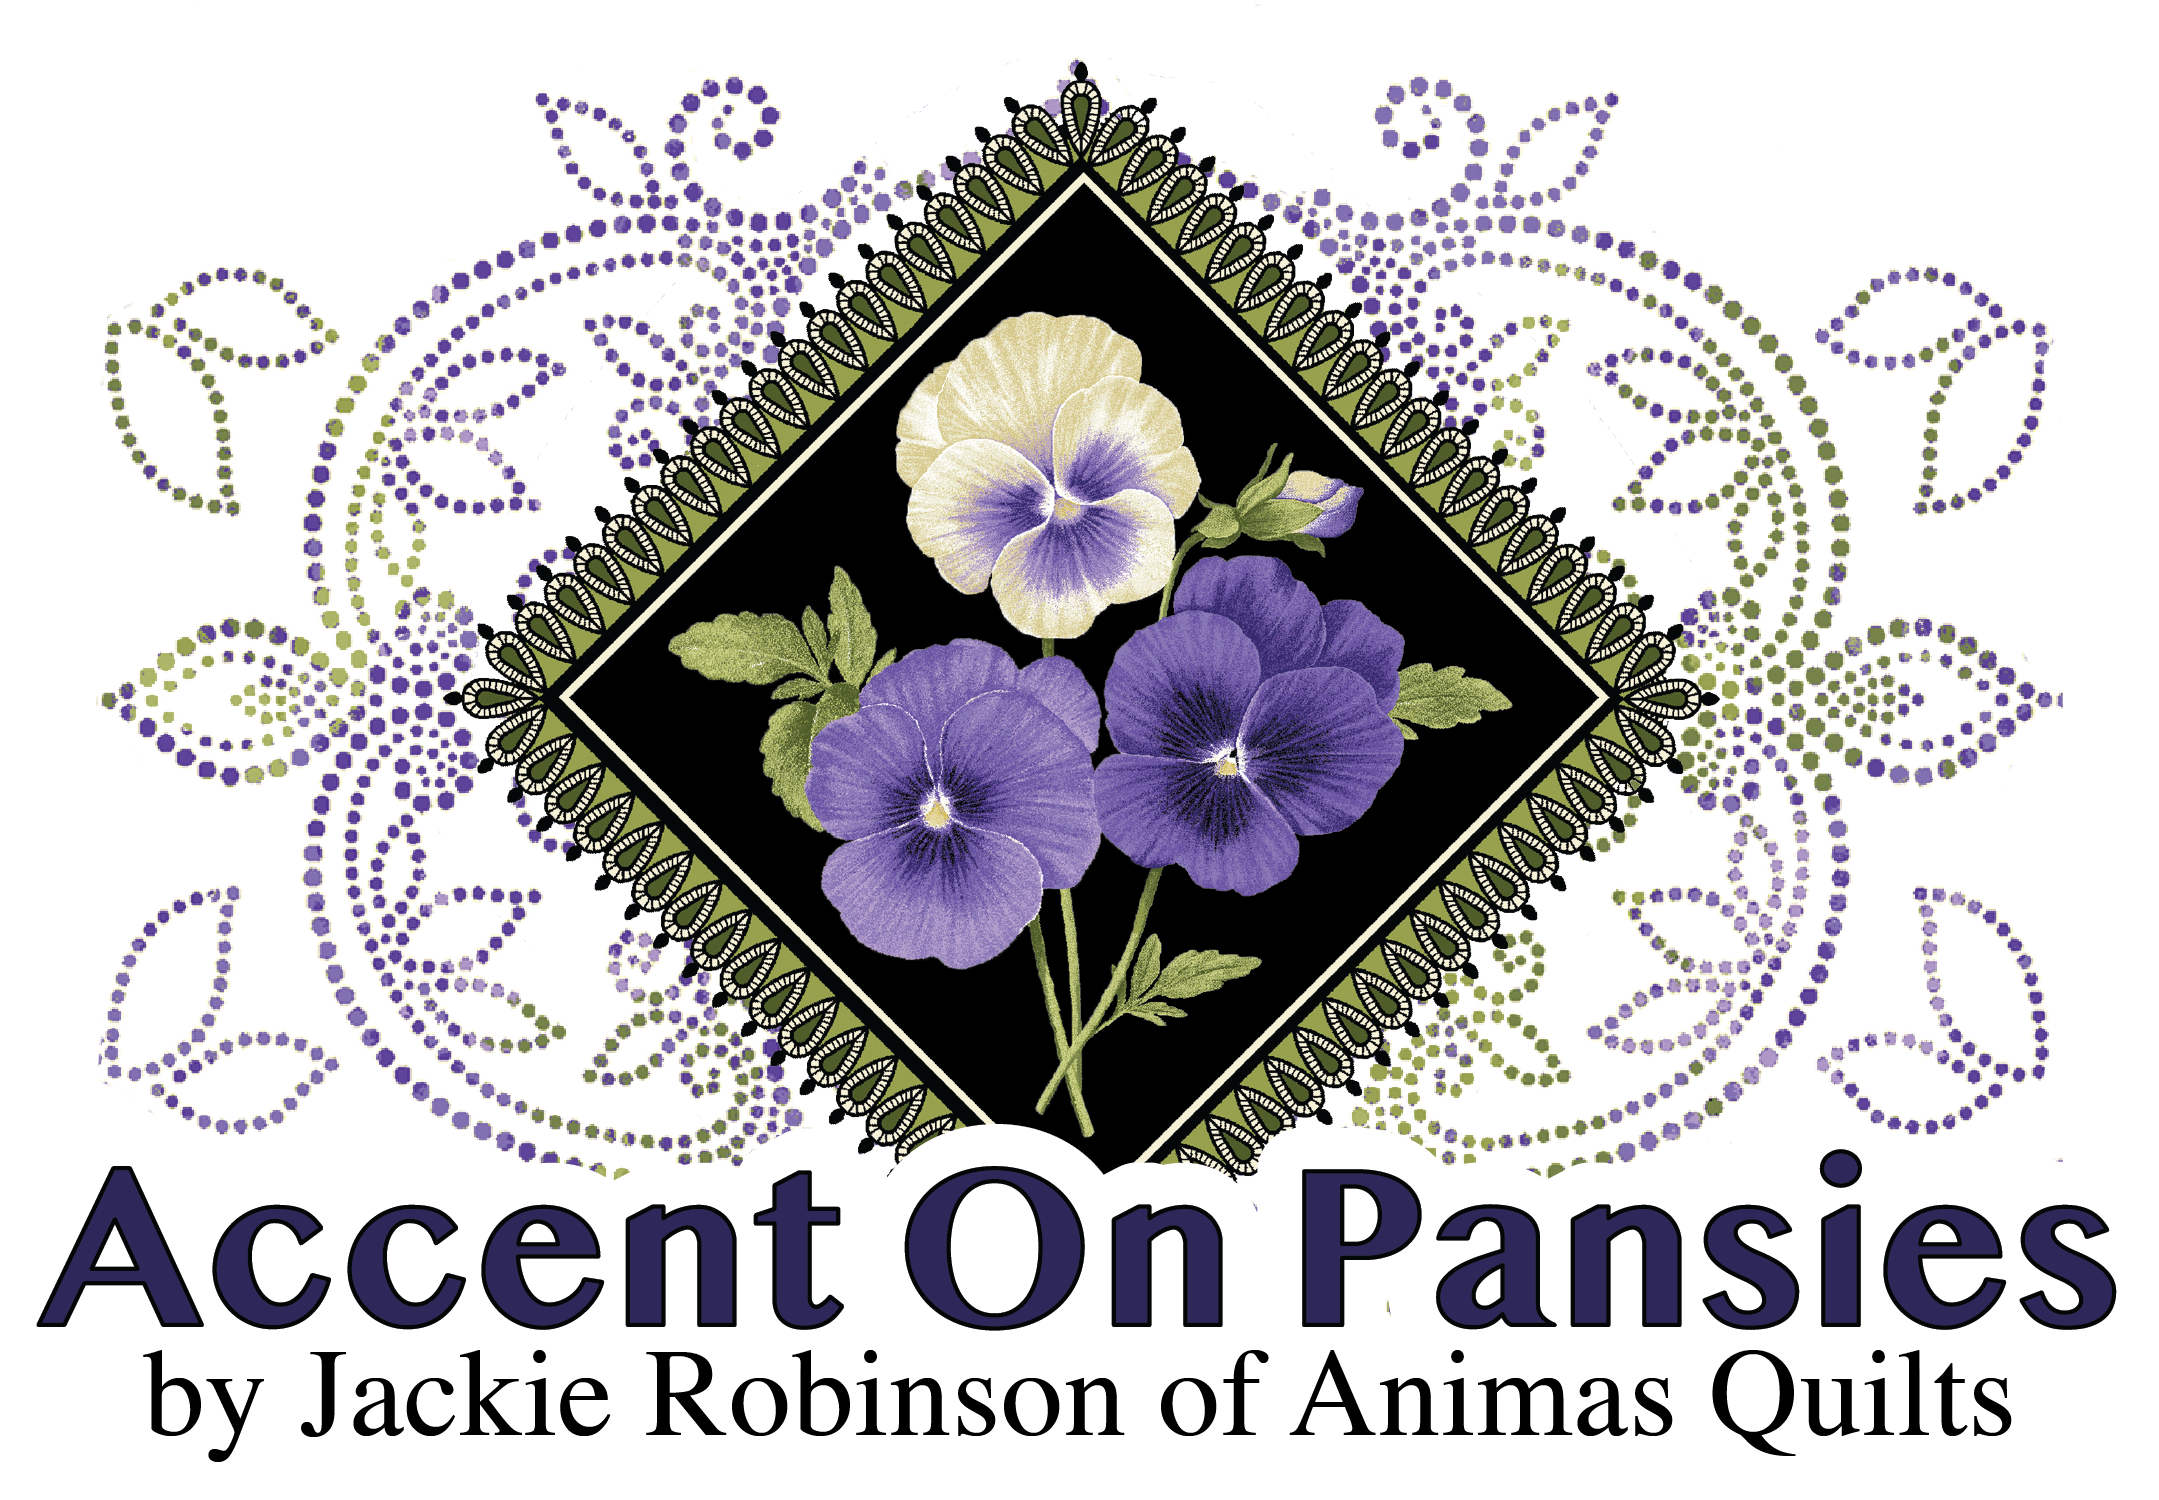 Accent on Pansies